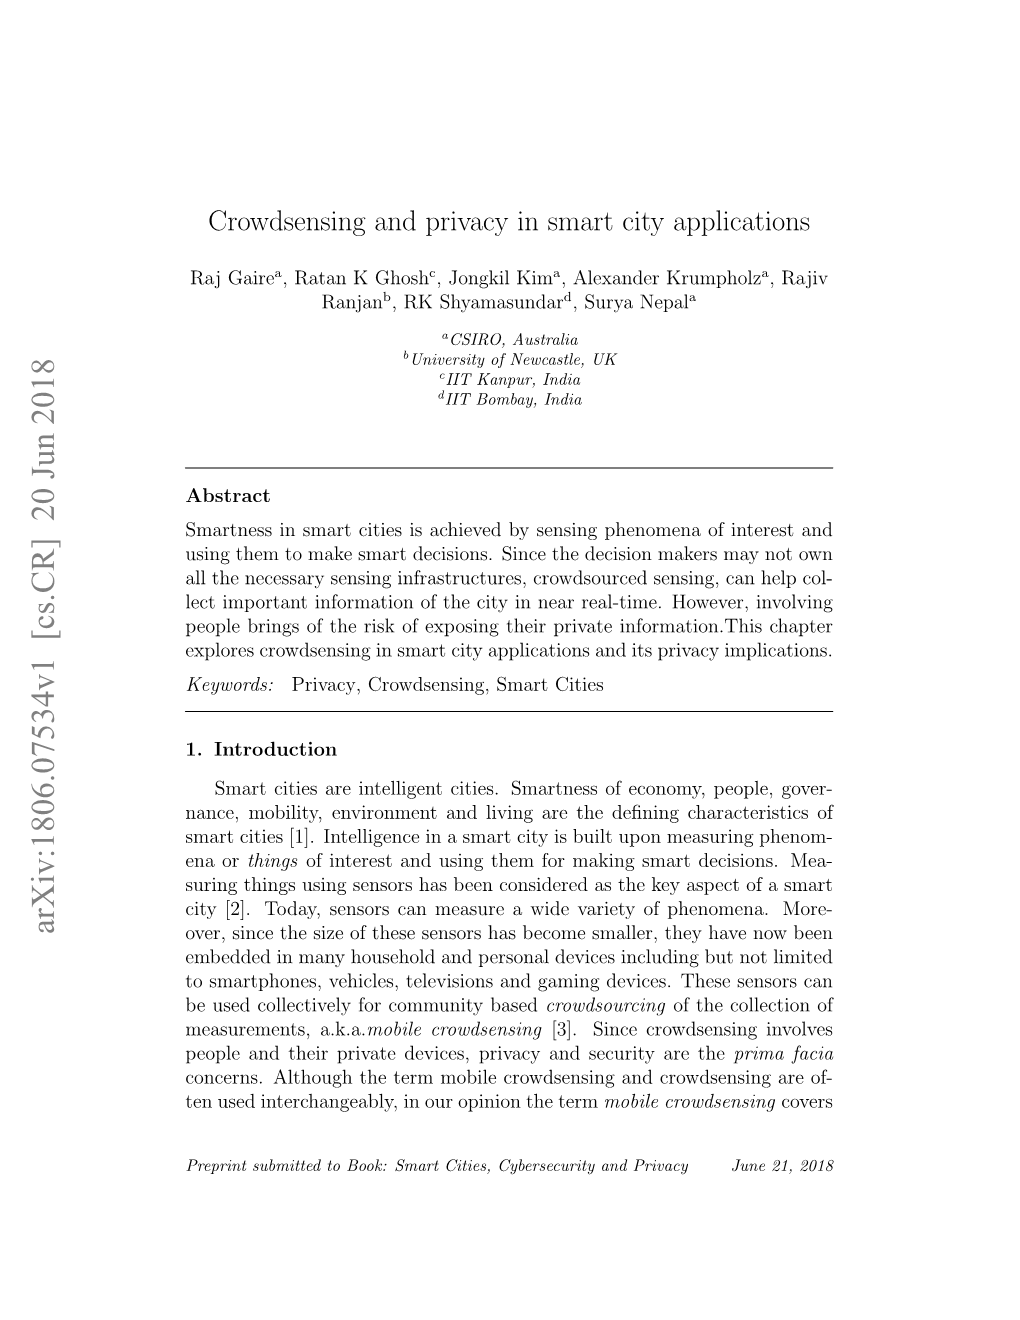 Crowdsensing and Privacy in Smart City Applications